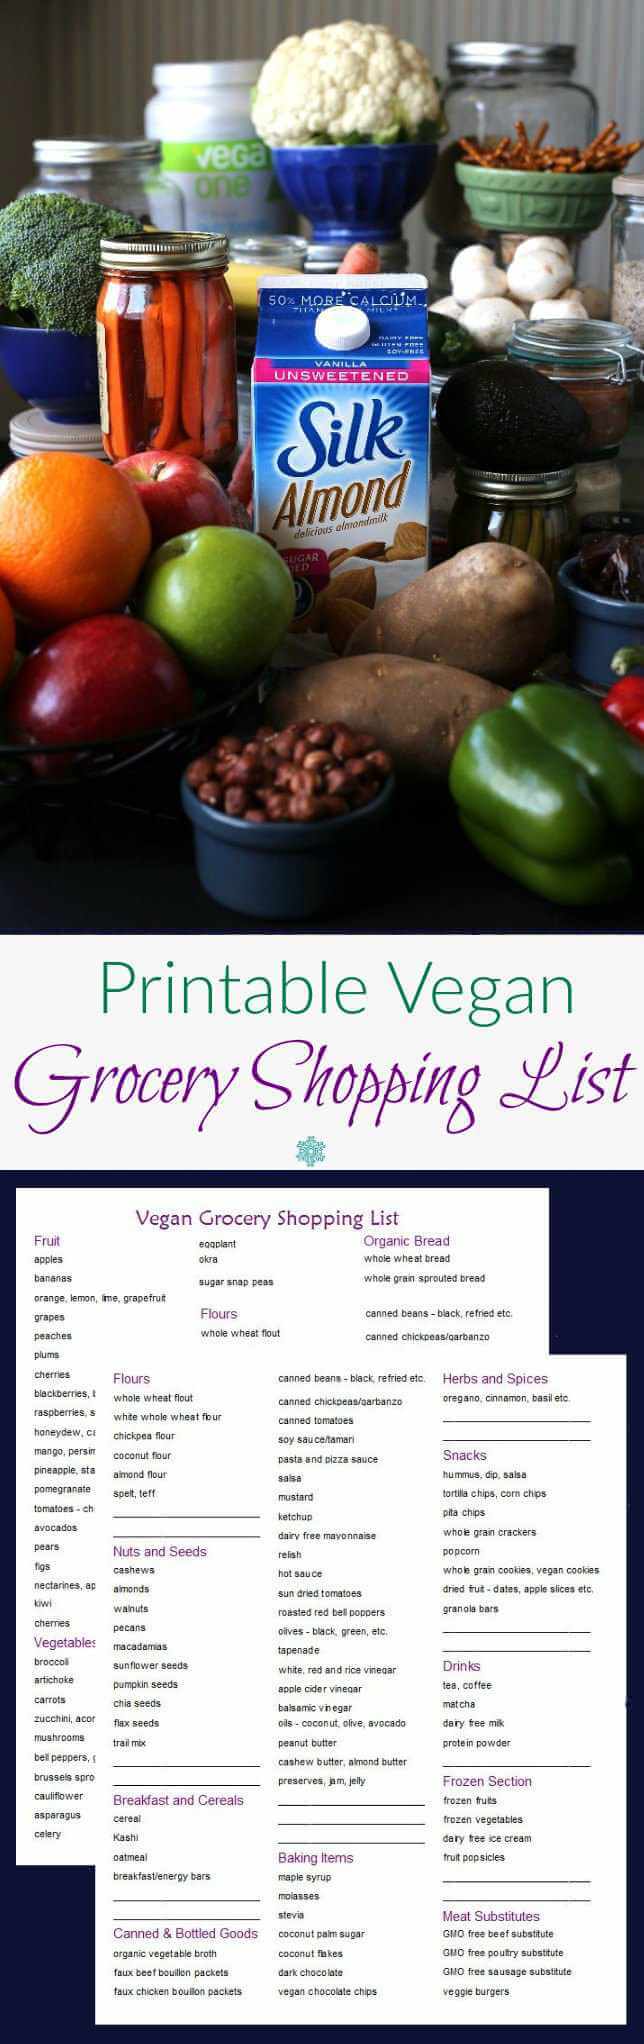 Free Printable Vegan Grocery Shopping List – a two sided grocery list photo below a tall photo filled with veggies, fruit, nuts and other goodies that you could find on yourvegan shopping list.